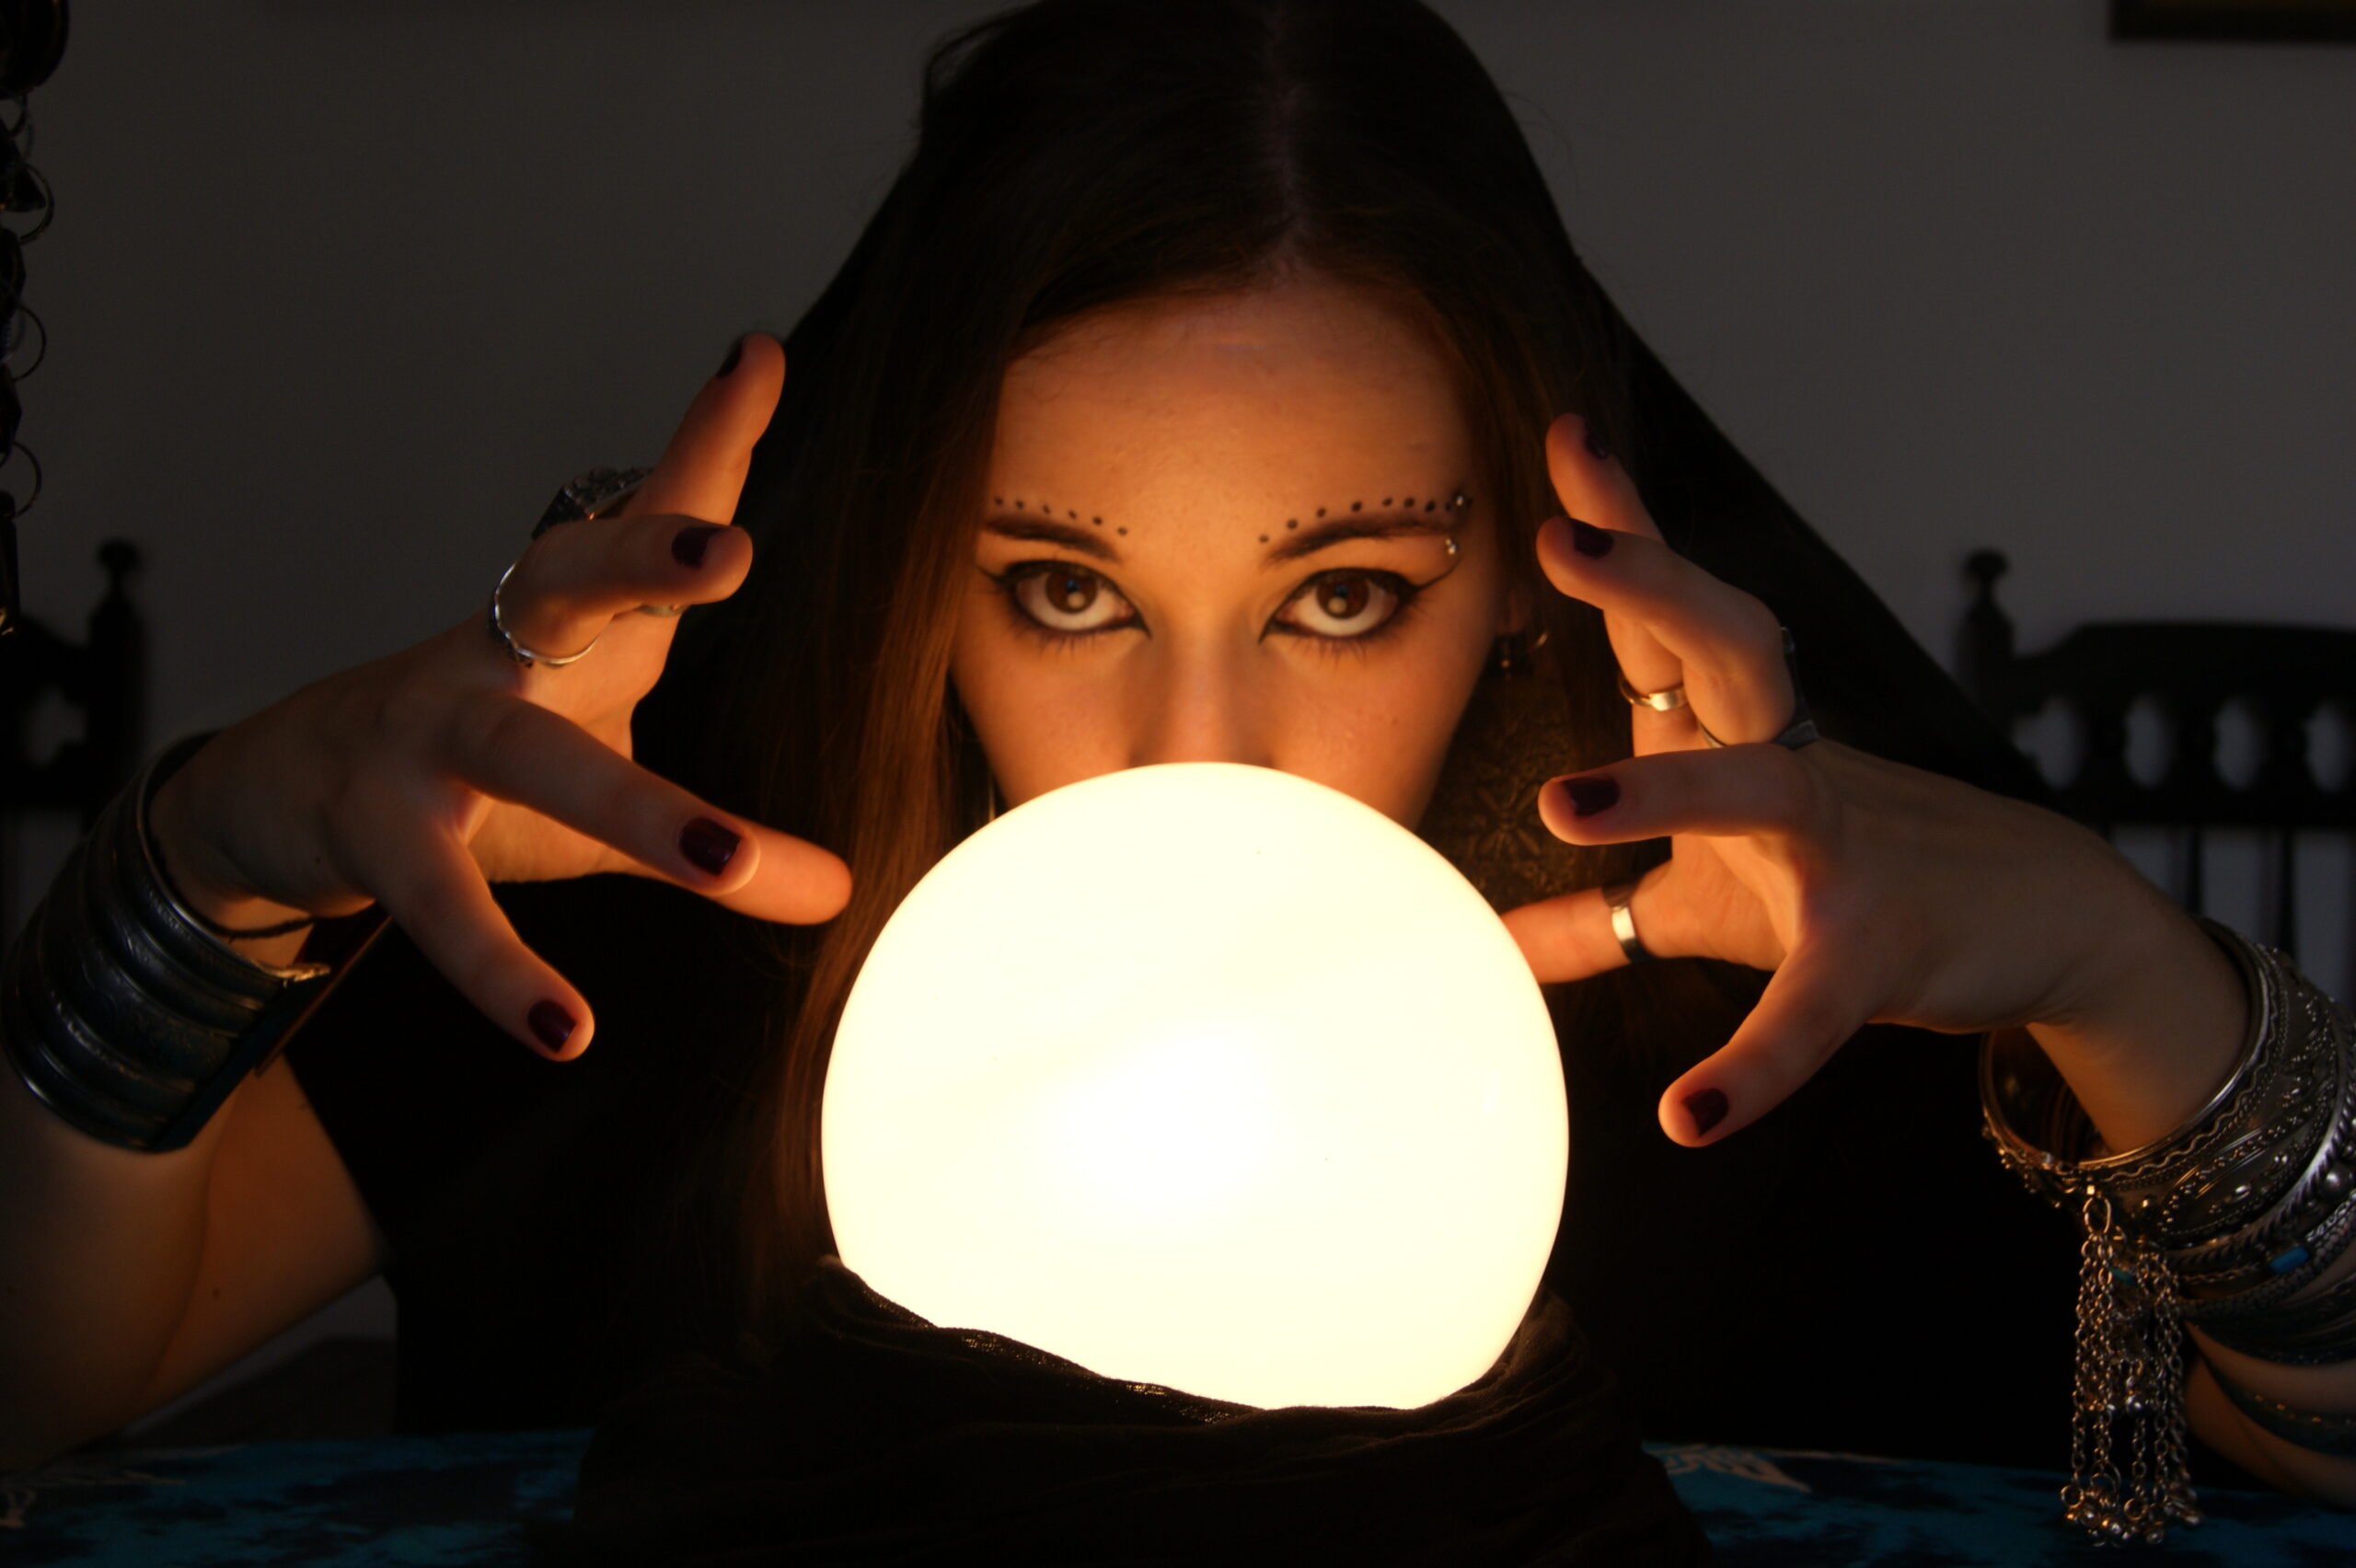 Fortune Teller witch occult crystal ball fantasy women females face